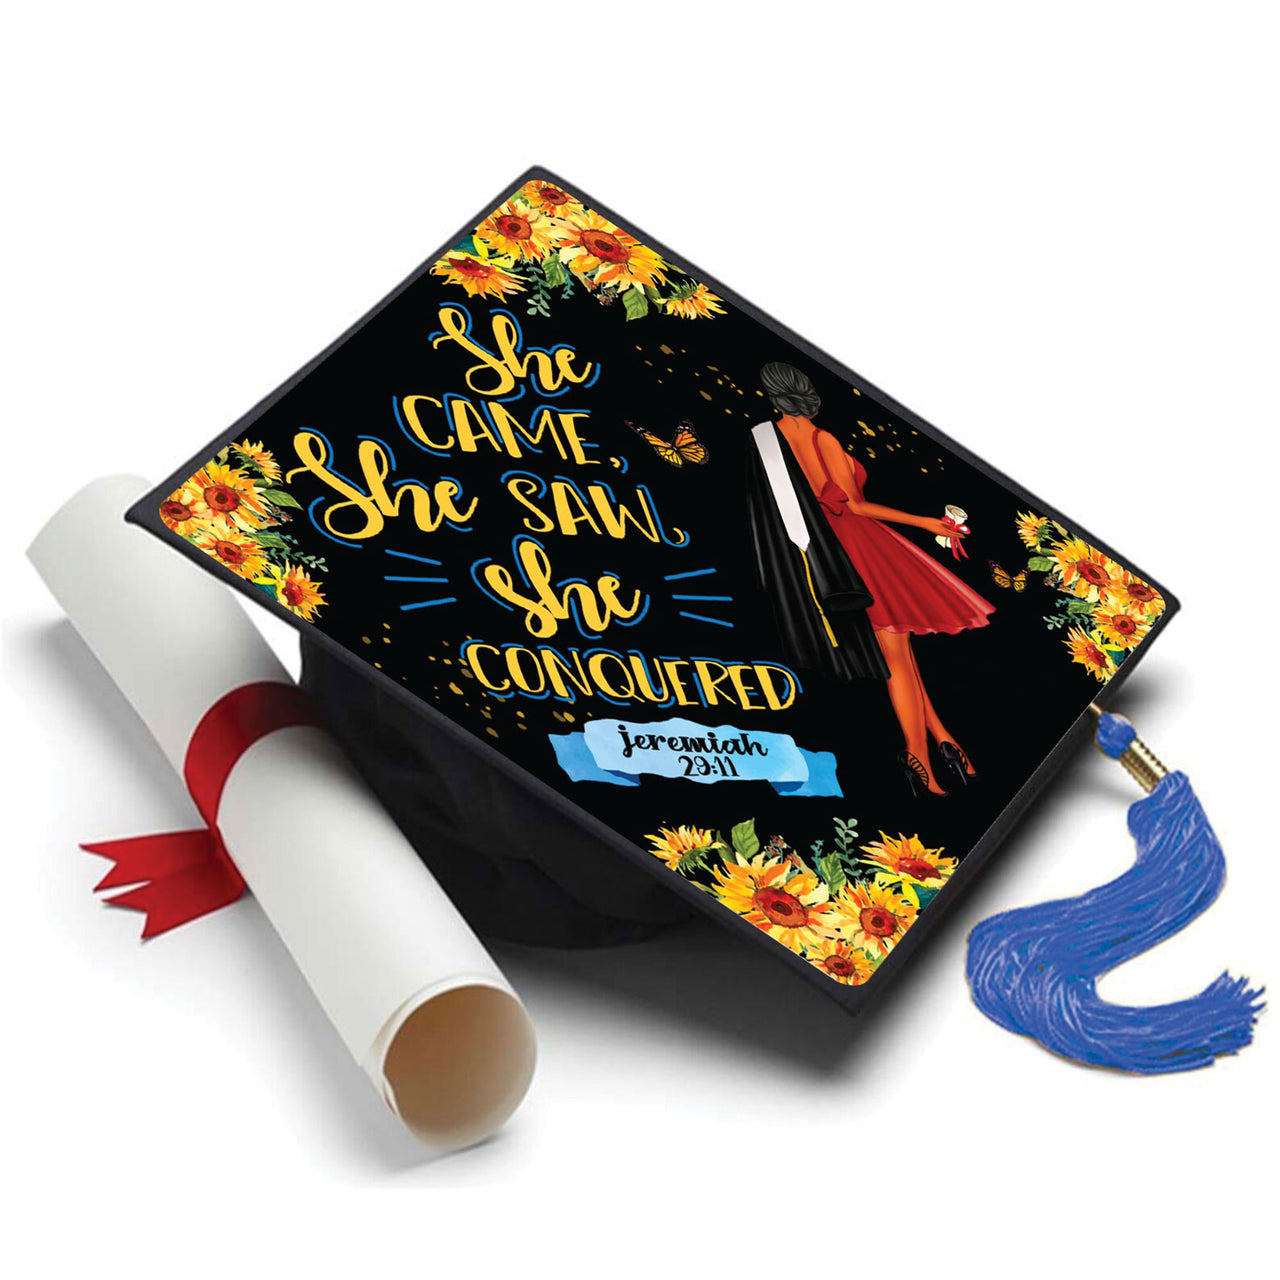 She Came She Saw She Conquered Grad Cap Topper - Tassel Toppers - Professionally Decorated Grad Caps